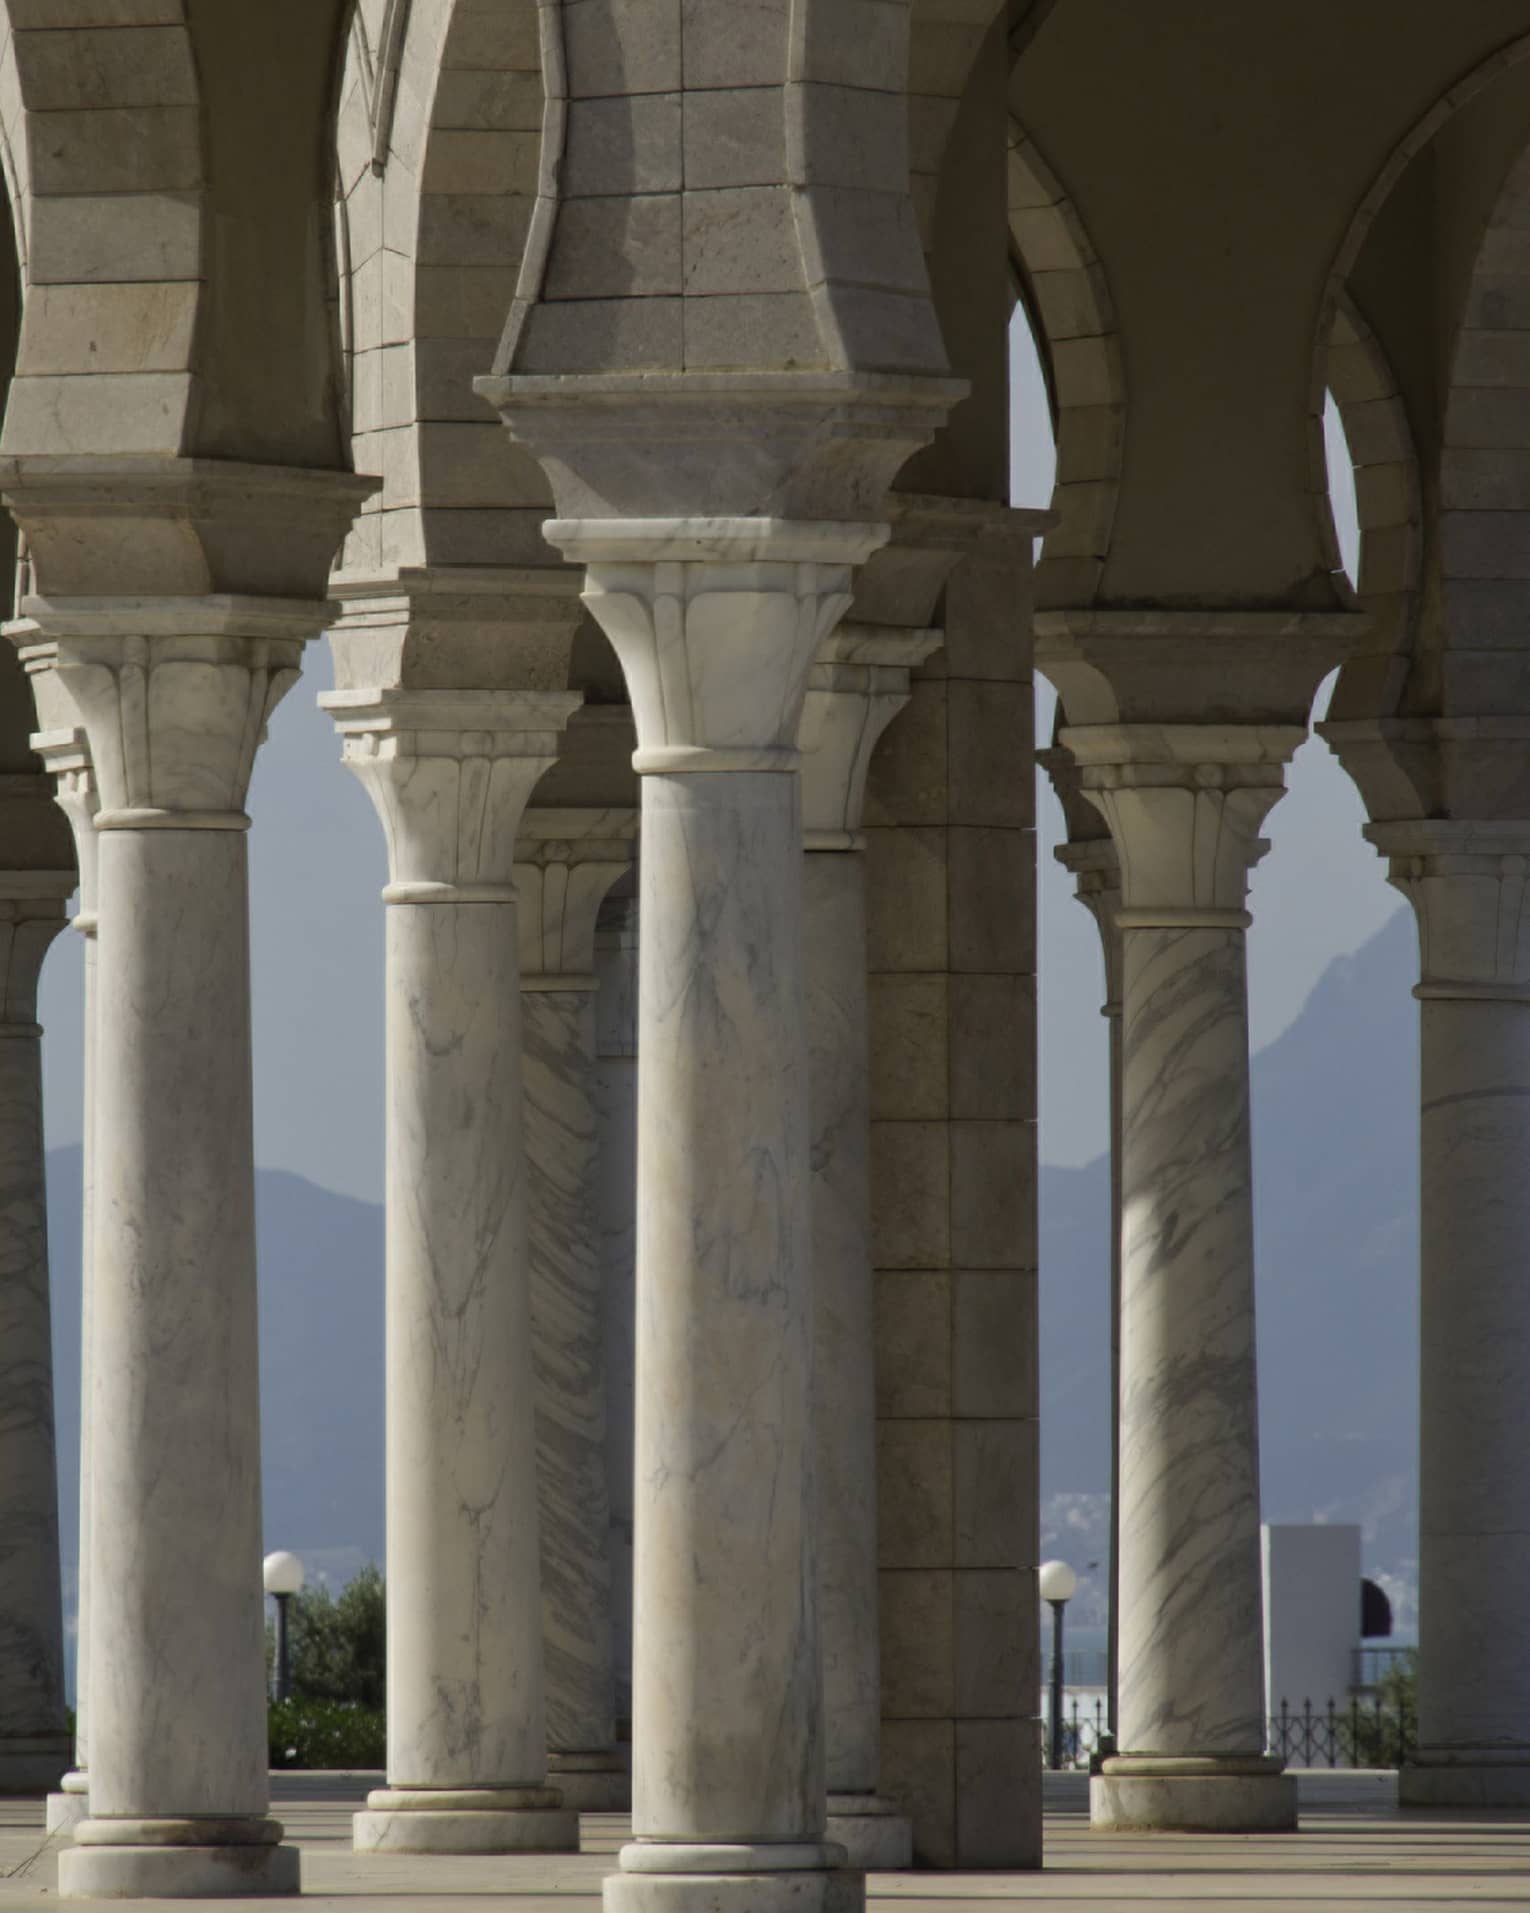 Columns in the ancient city of Carthage